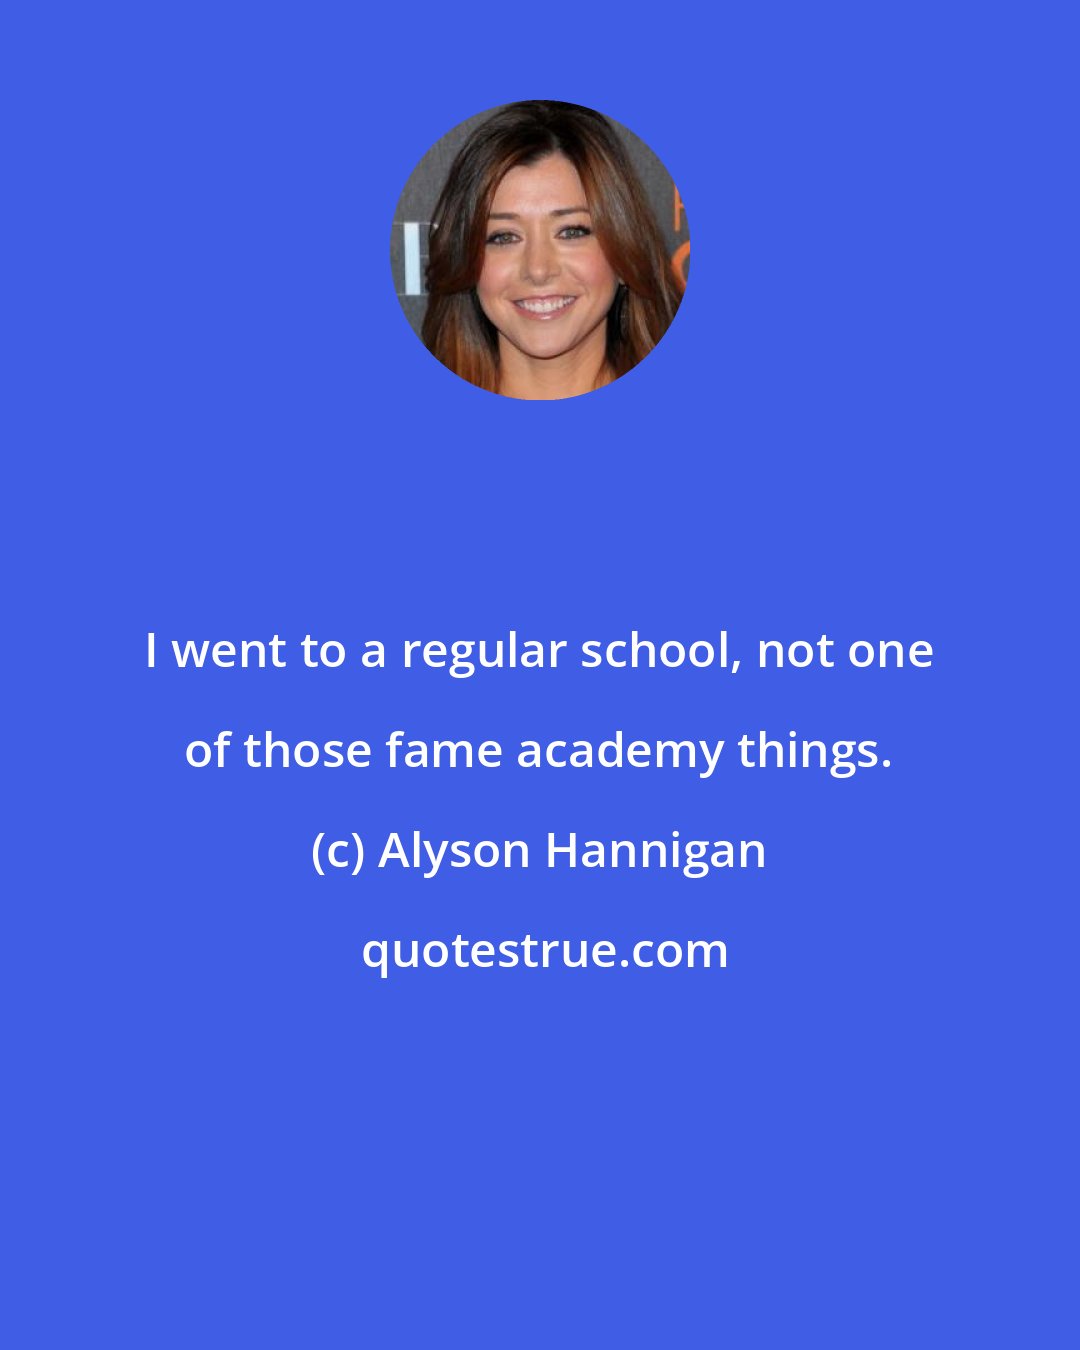 Alyson Hannigan: I went to a regular school, not one of those fame academy things.